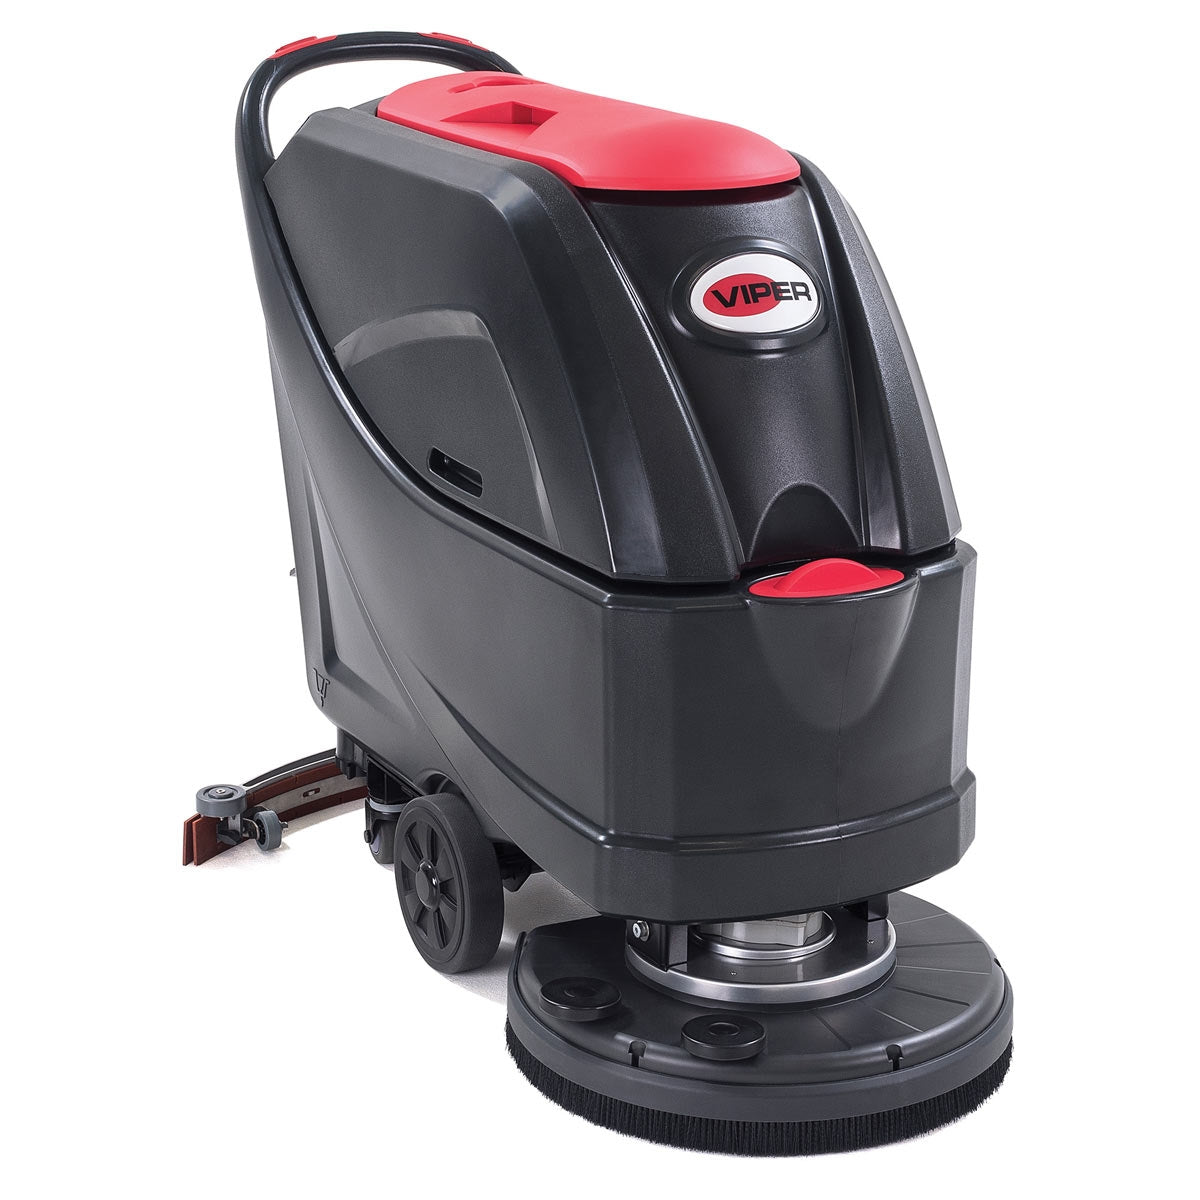 https://cdn.shopify.com/s/files/1/0624/3270/6740/products/viper-as5160-auto-scrubber-w-brush-and-skirt.jpg?v=1670959470